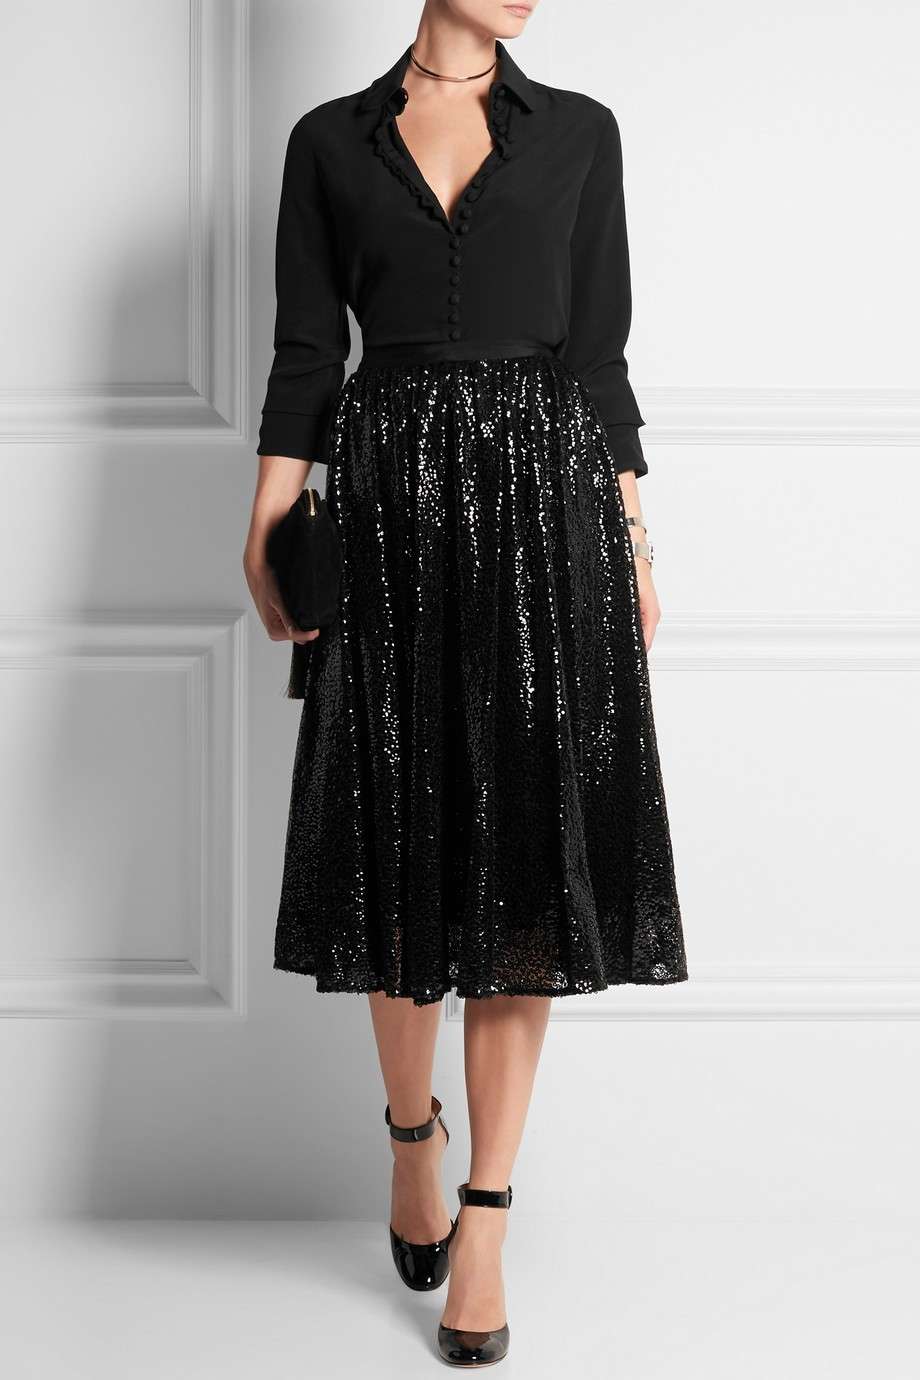 Gonna in tulle con paillettes Michal Kors